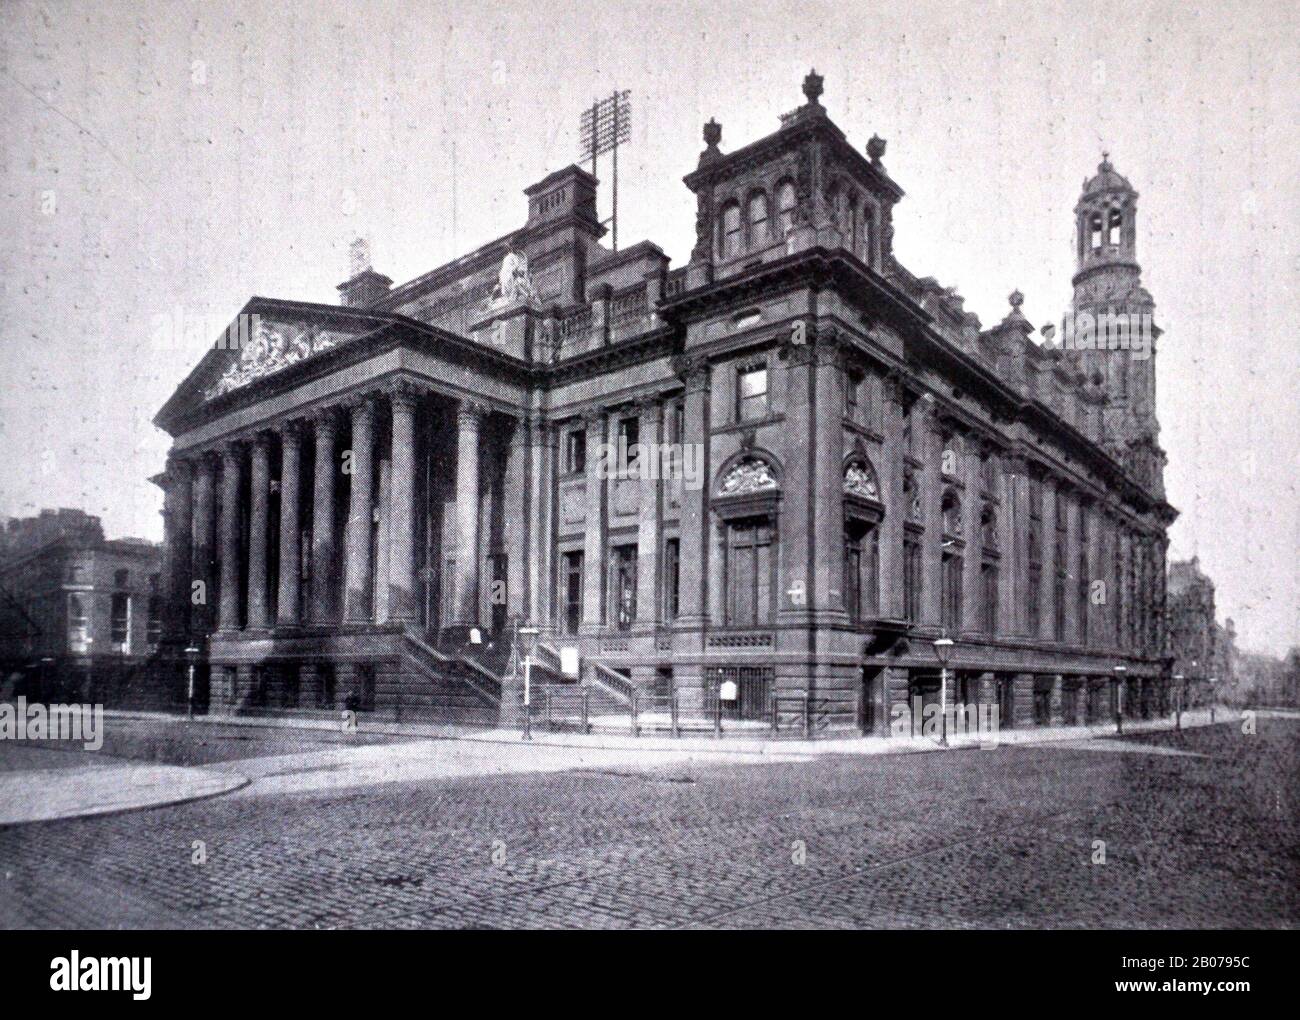 Archival black and white photograph of the Royal Exchange, Manchester, uk, from the book: 'A Survey of the History, Commerce and Manufactures of Lancashire' by Reuben Spencer, published 1897. Stock Photo